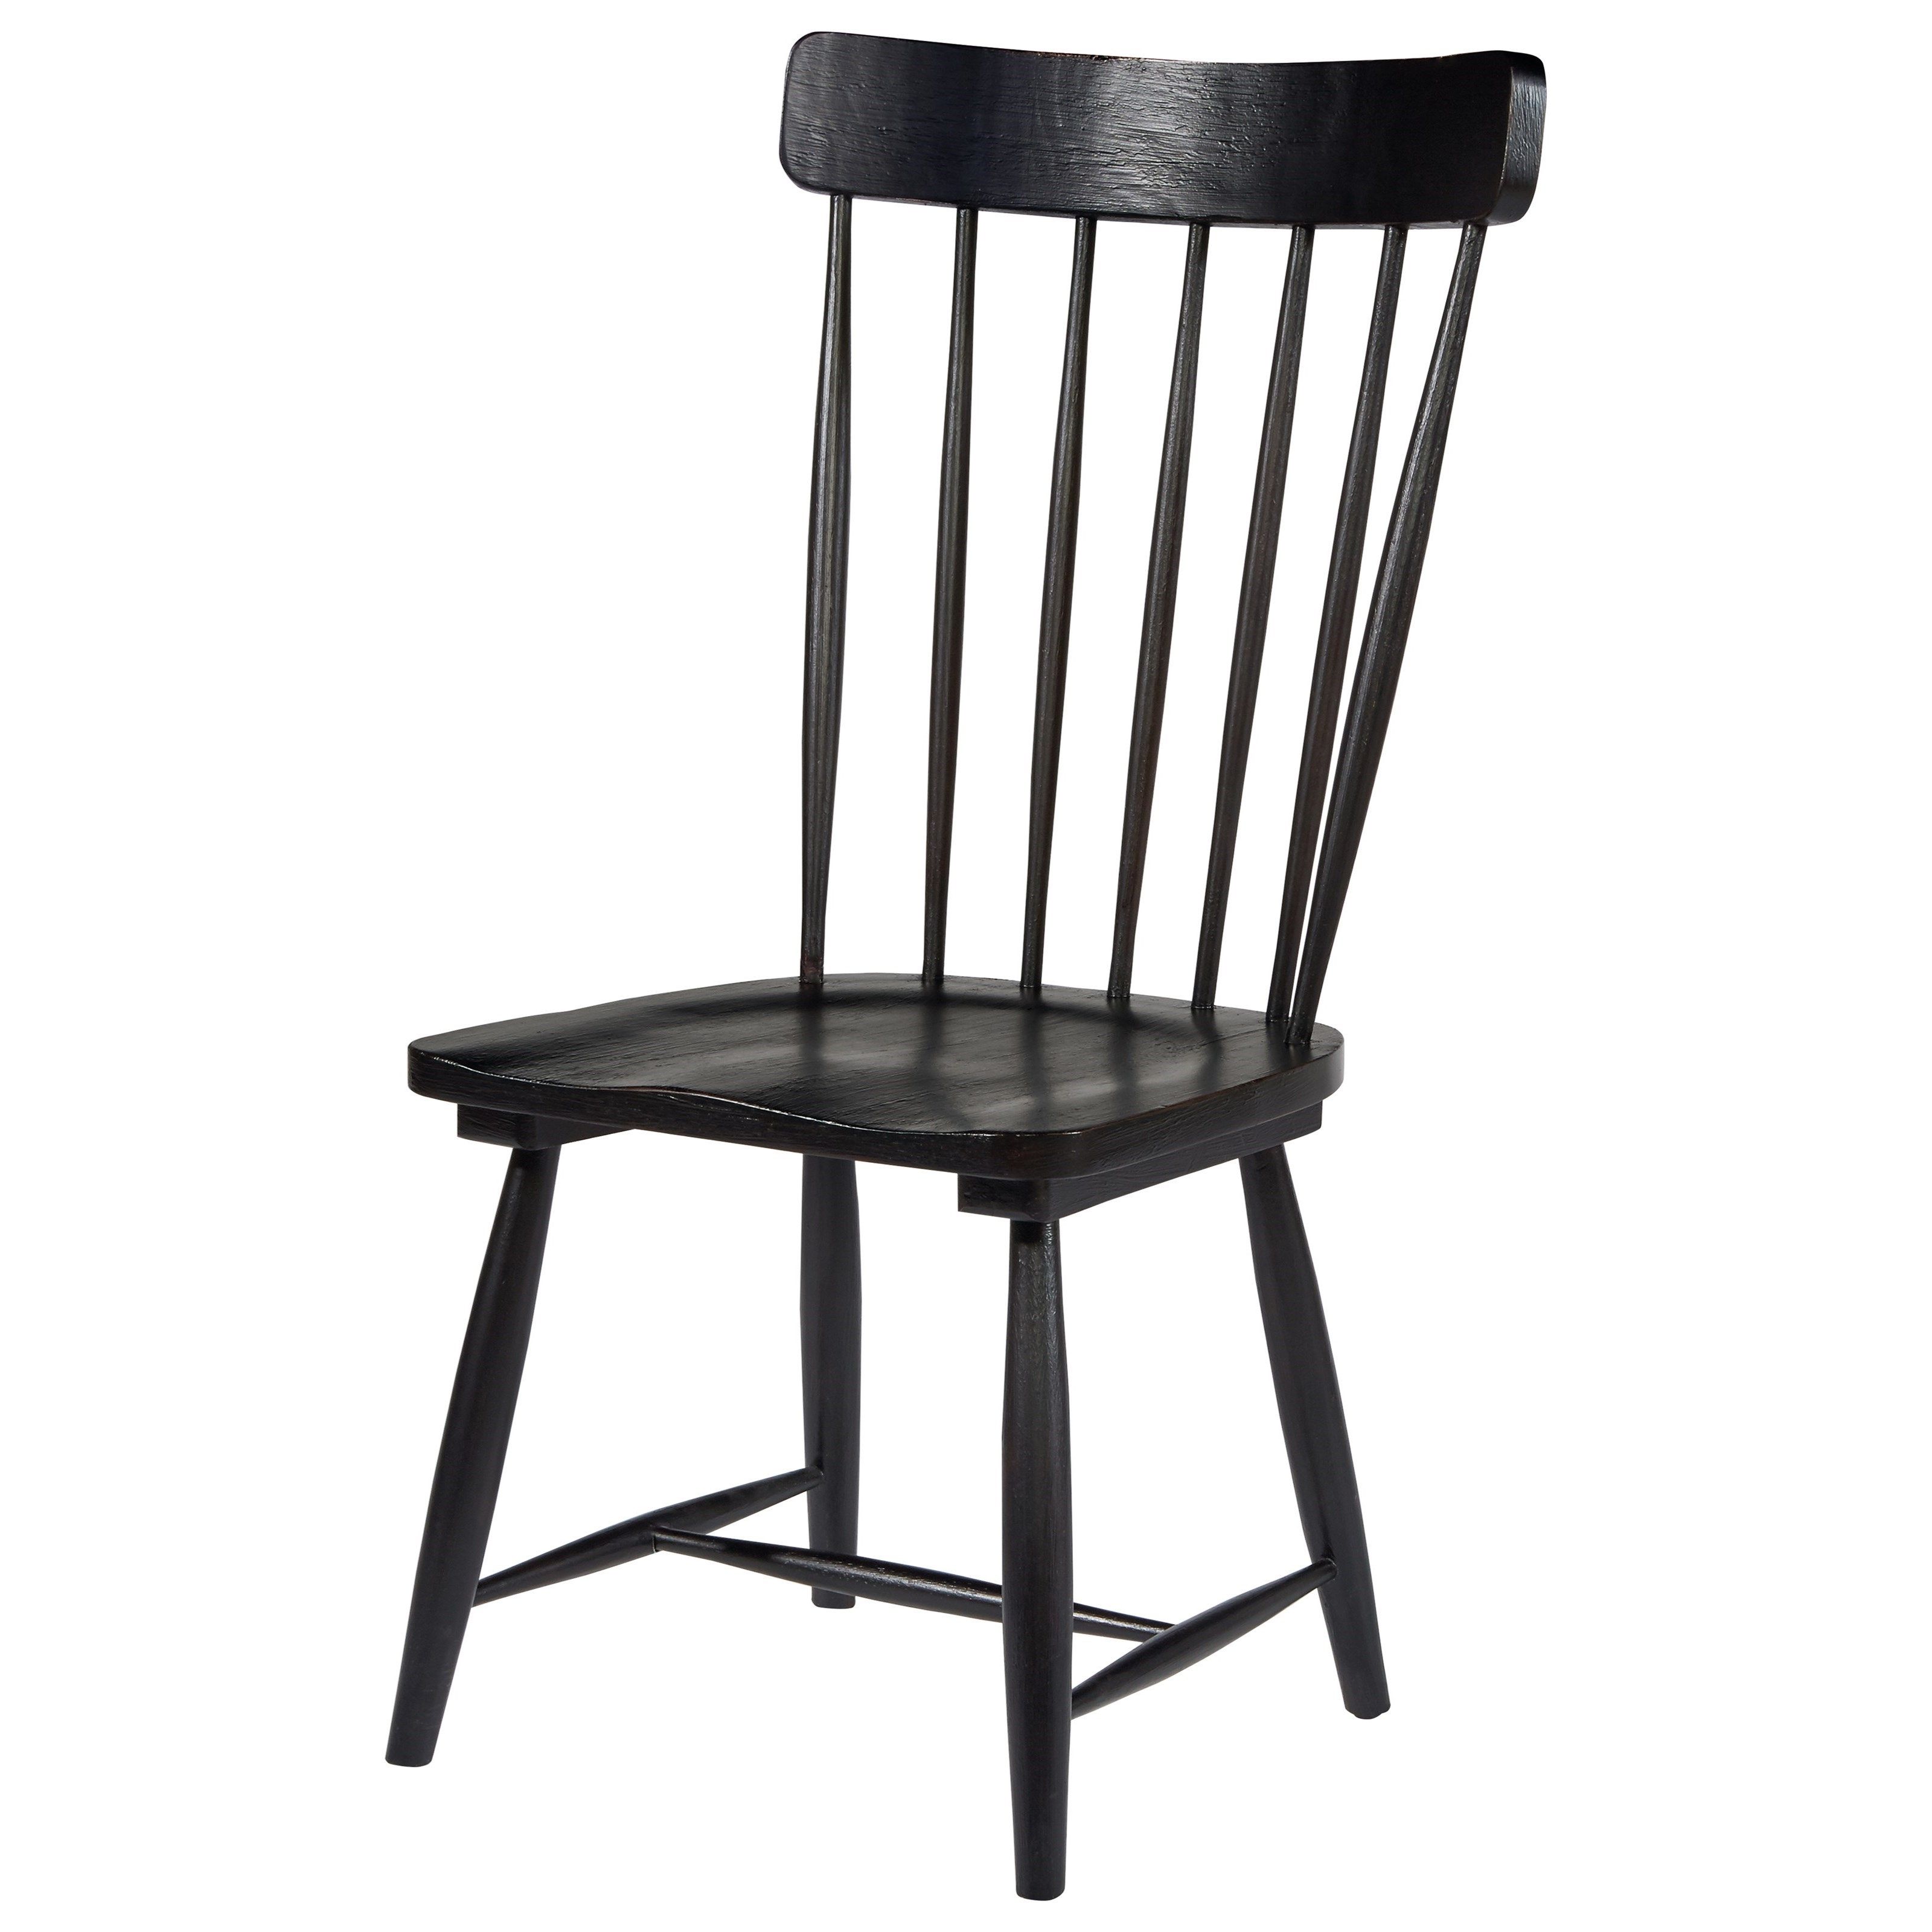 Magnolia Homejoanna Gaines Farmhouse Spindle Back Side Chair Intended For Favorite Magnolia Home Hamilton Saddle Side Chairs (Photo 4 of 20)